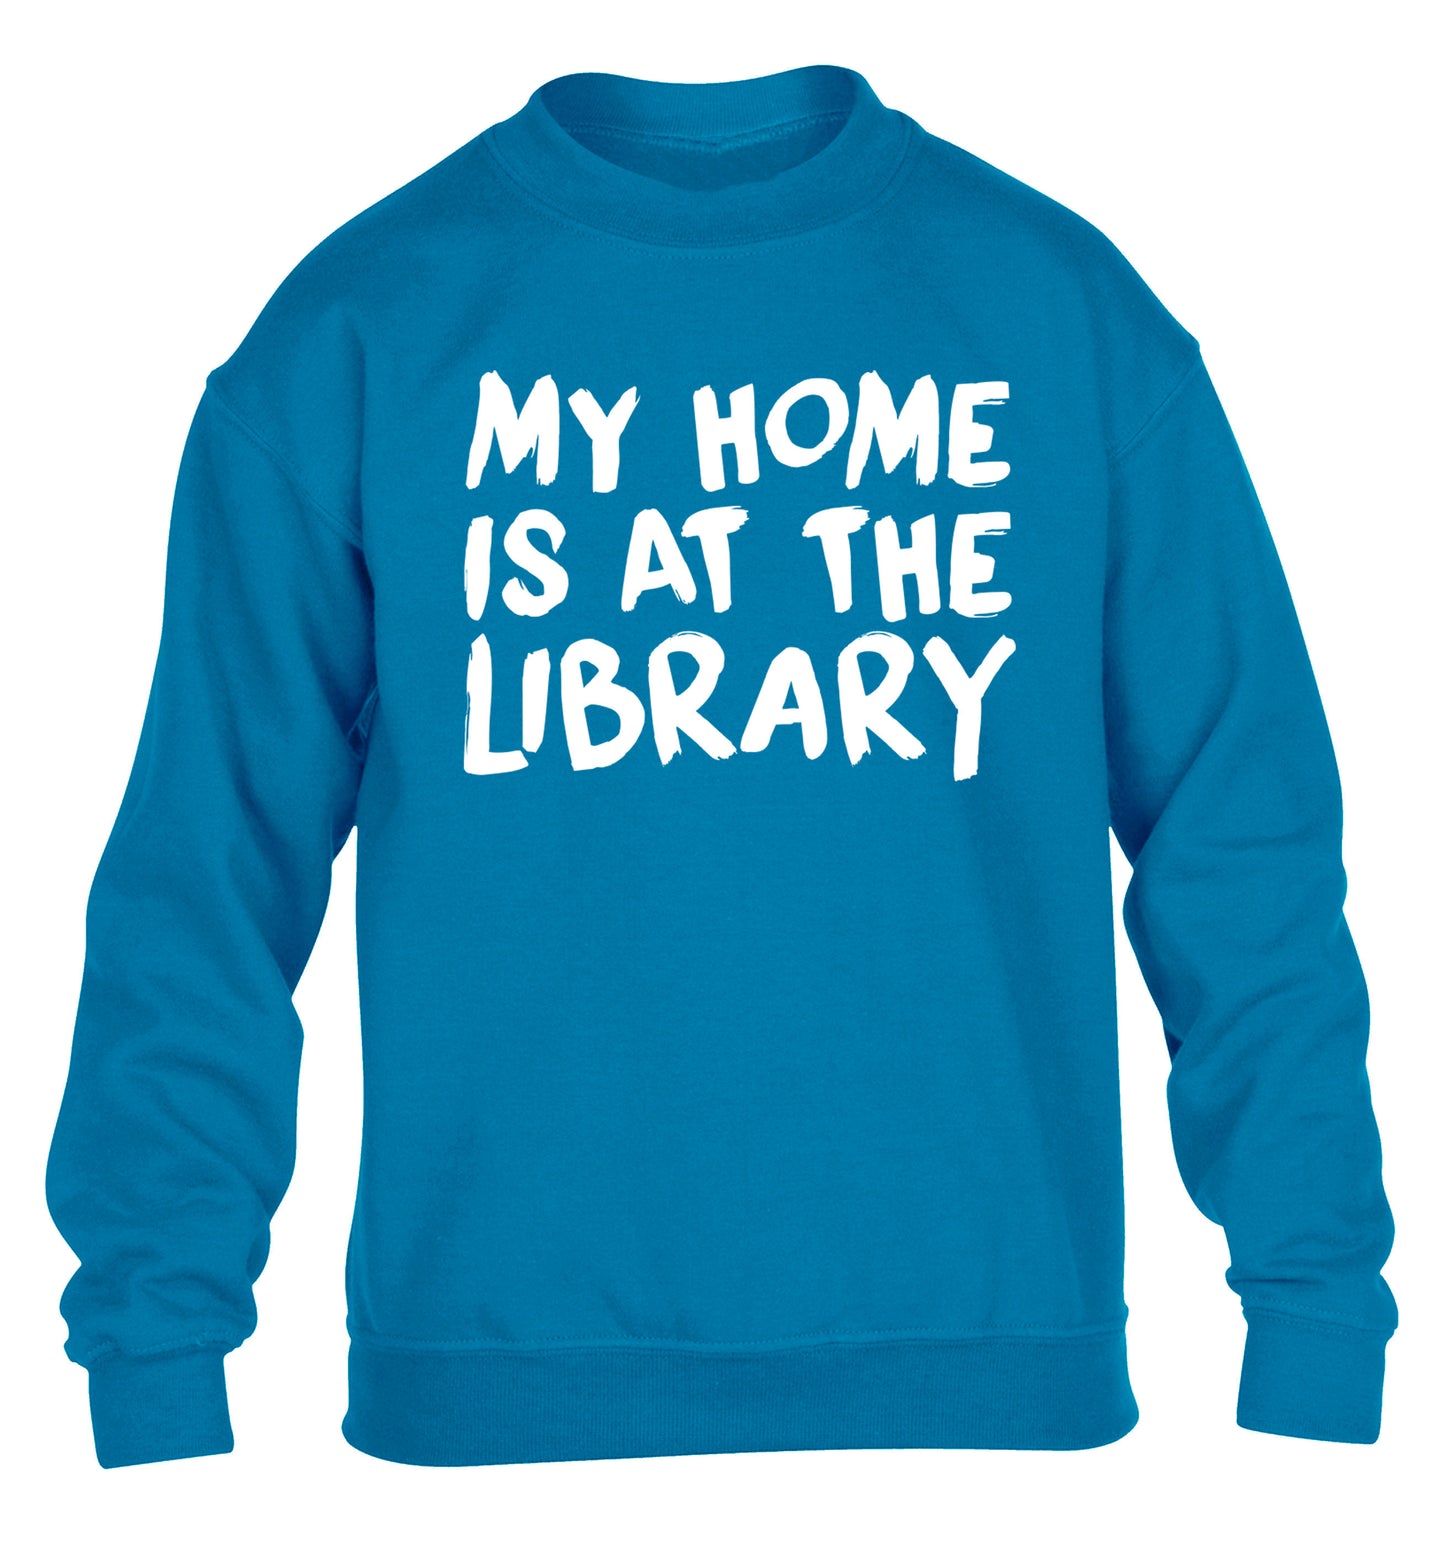 My home is at the library children's blue sweater 12-14 Years